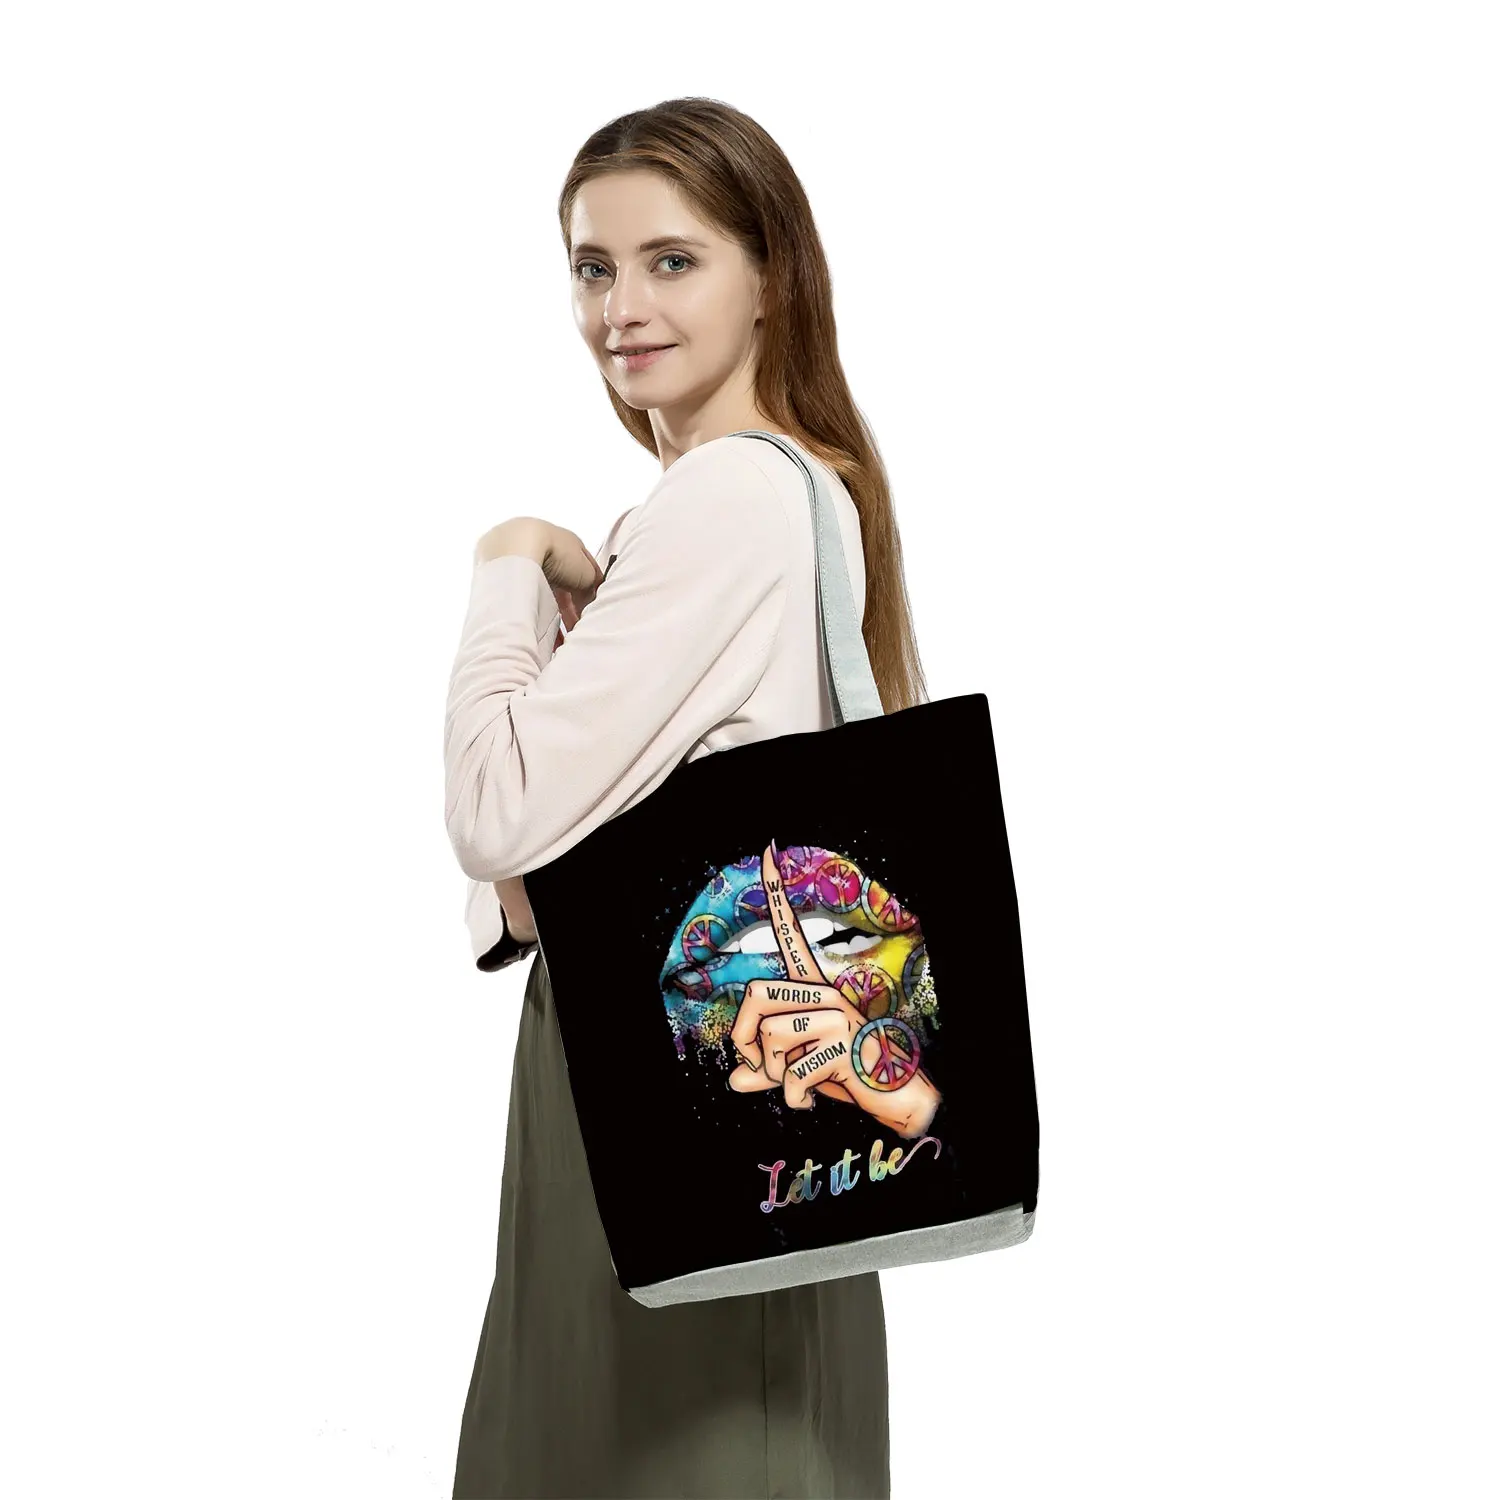 Handbags Lady Totes Shopping Bag Reusable Women Tote Bag Shoulder Work Bags Girls Black Kiss Leopard Lips Graphic Bags New Funny purse